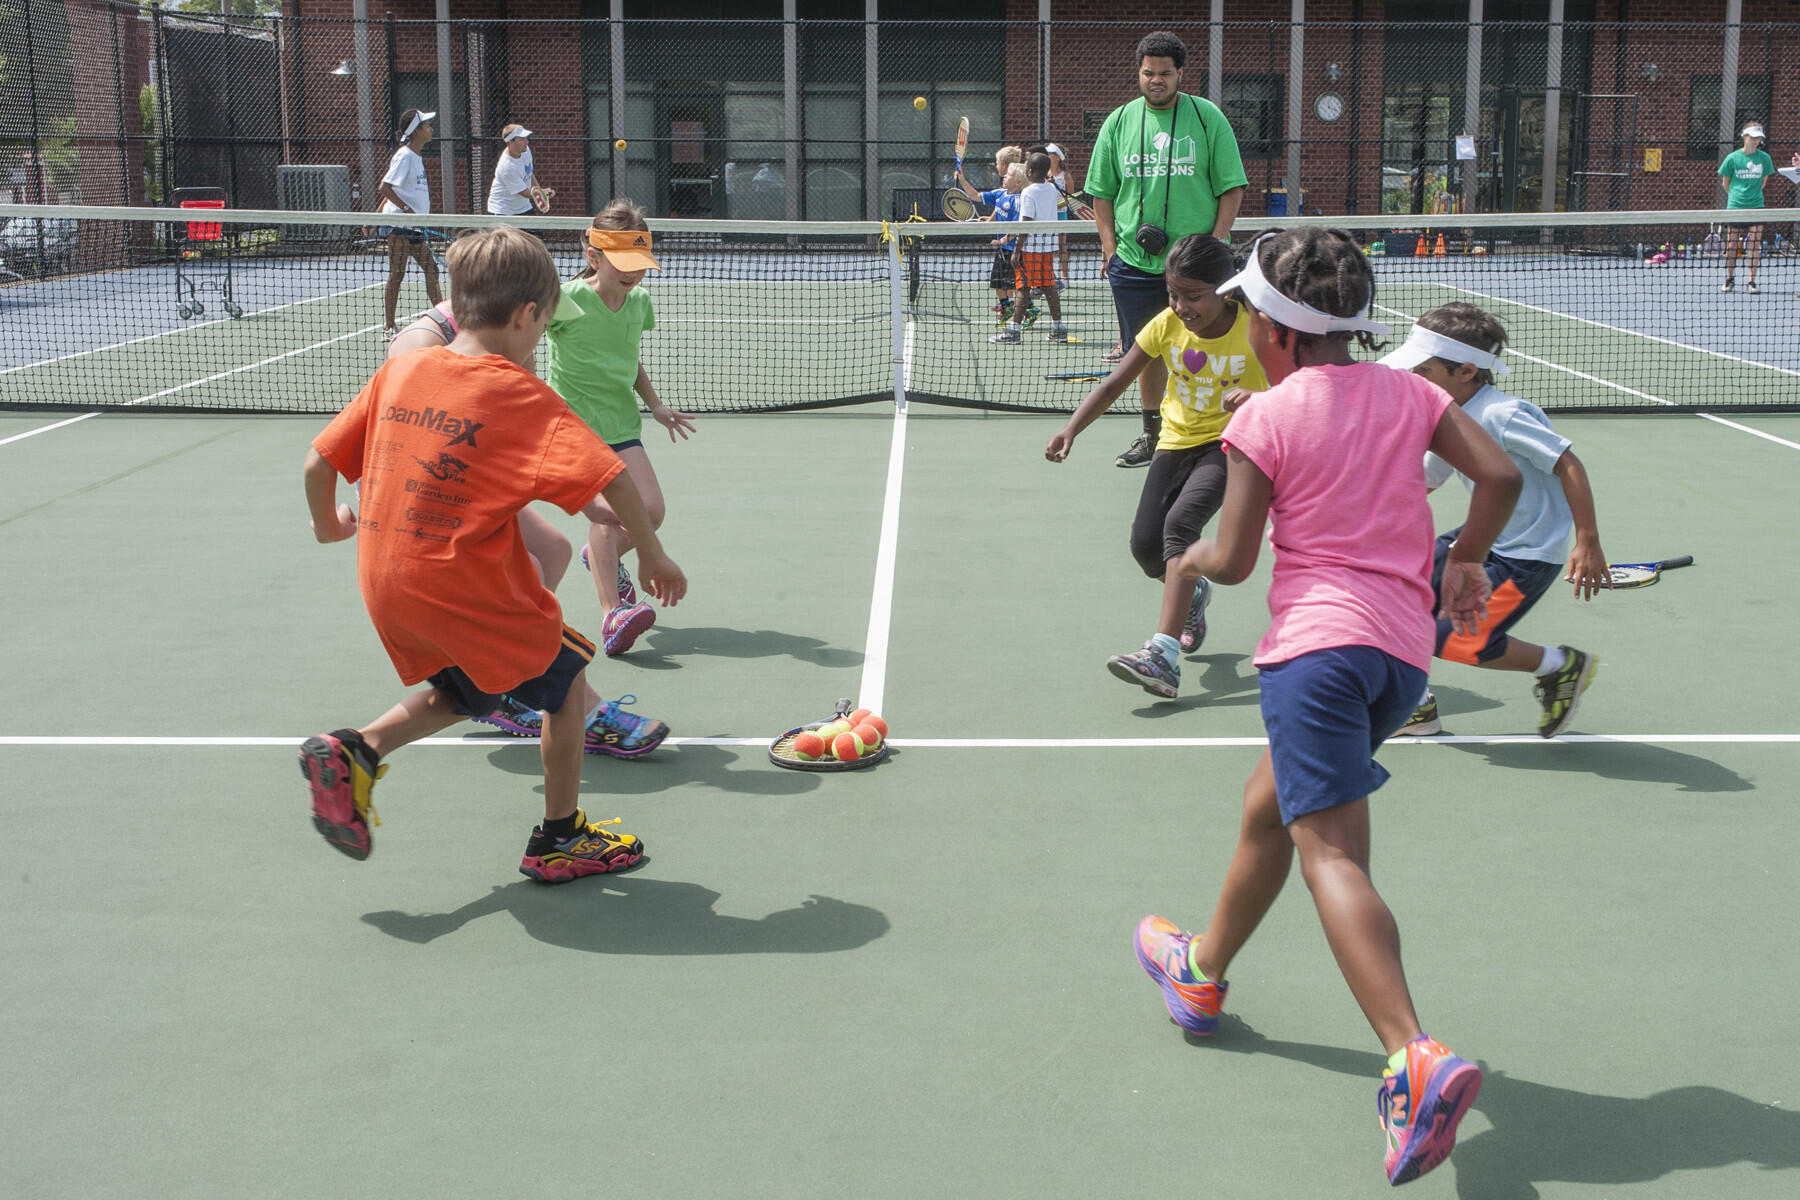 Children play at Lobs & Lessons, a youth enrichment program that promotes life skills through tennis. (File photo)